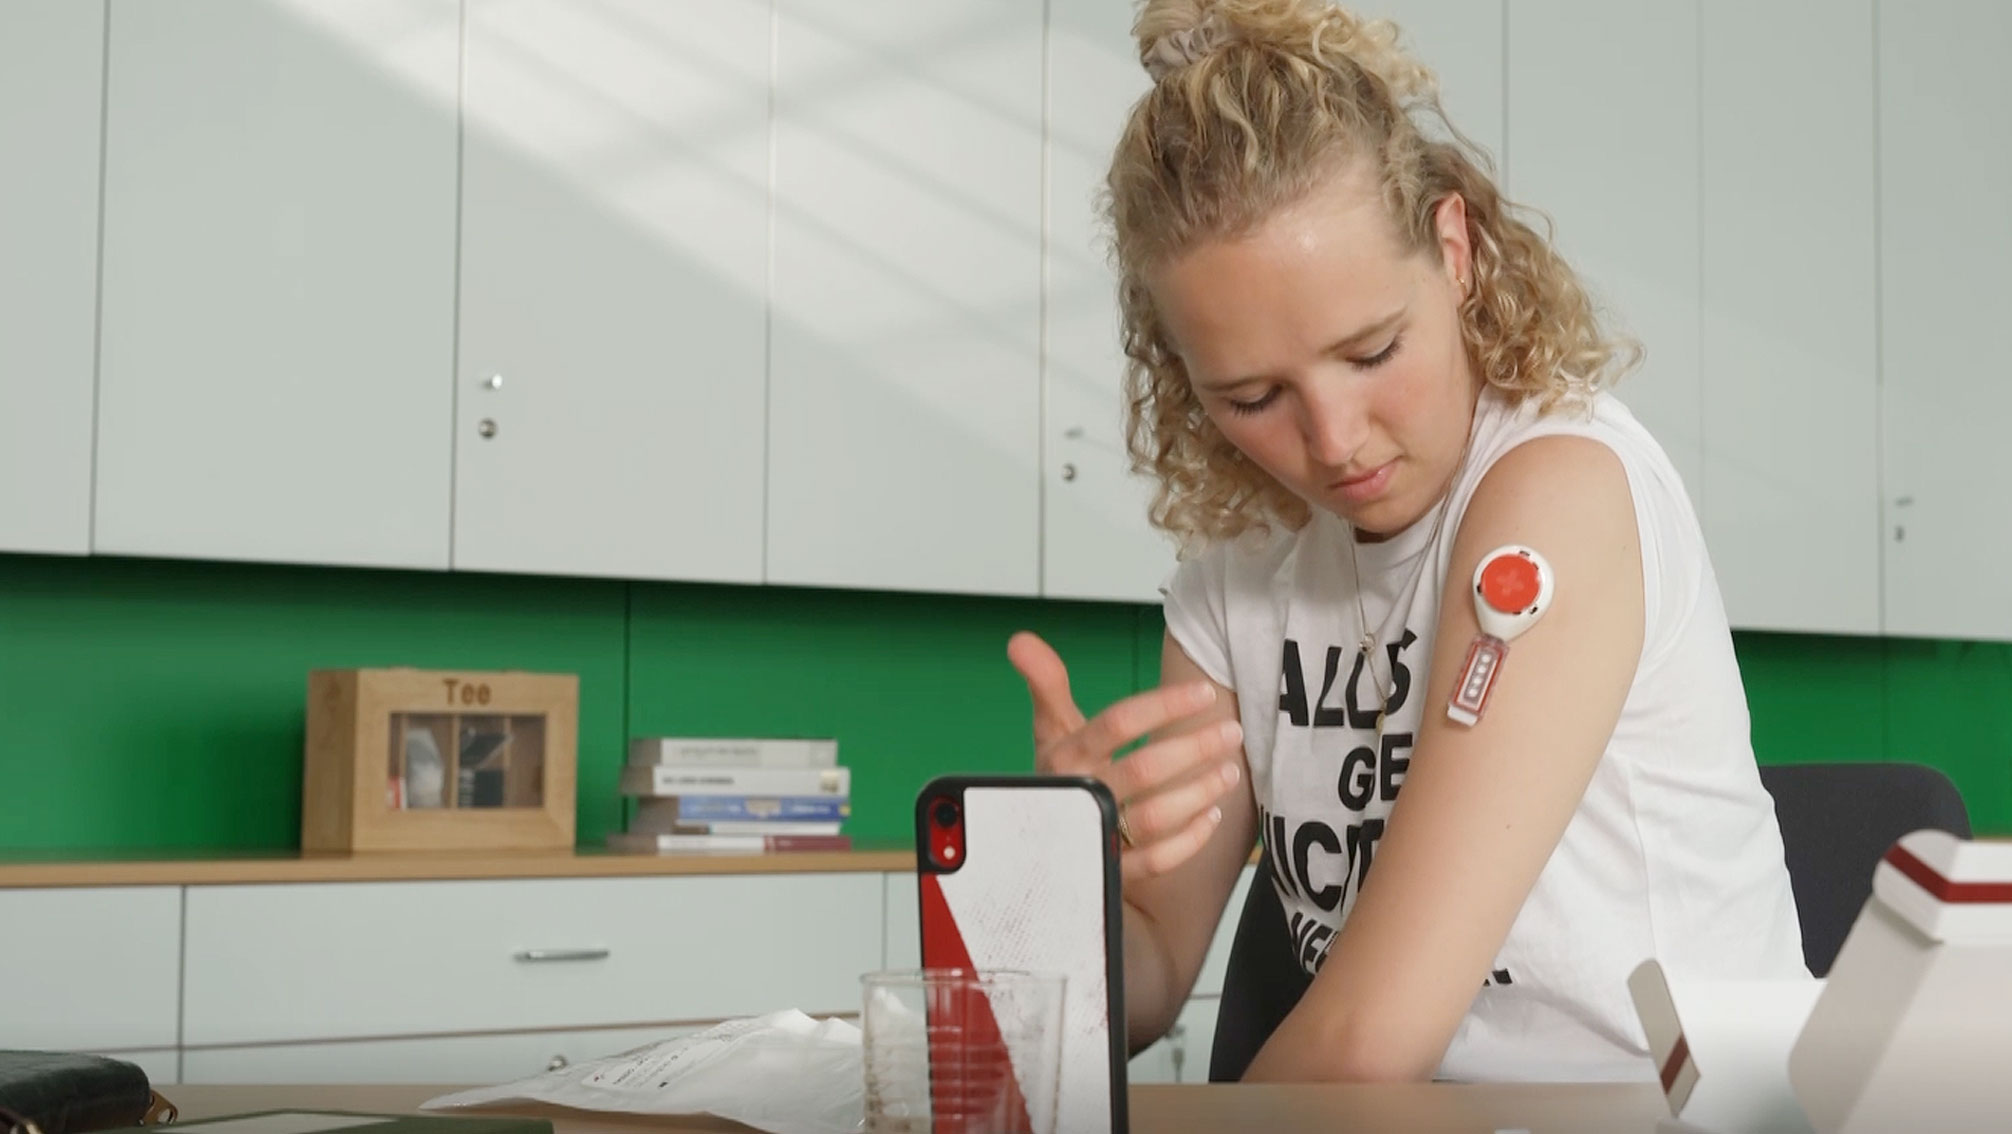 Application of a Dried Blood Spot Test by an athlete with a device on her upper arm